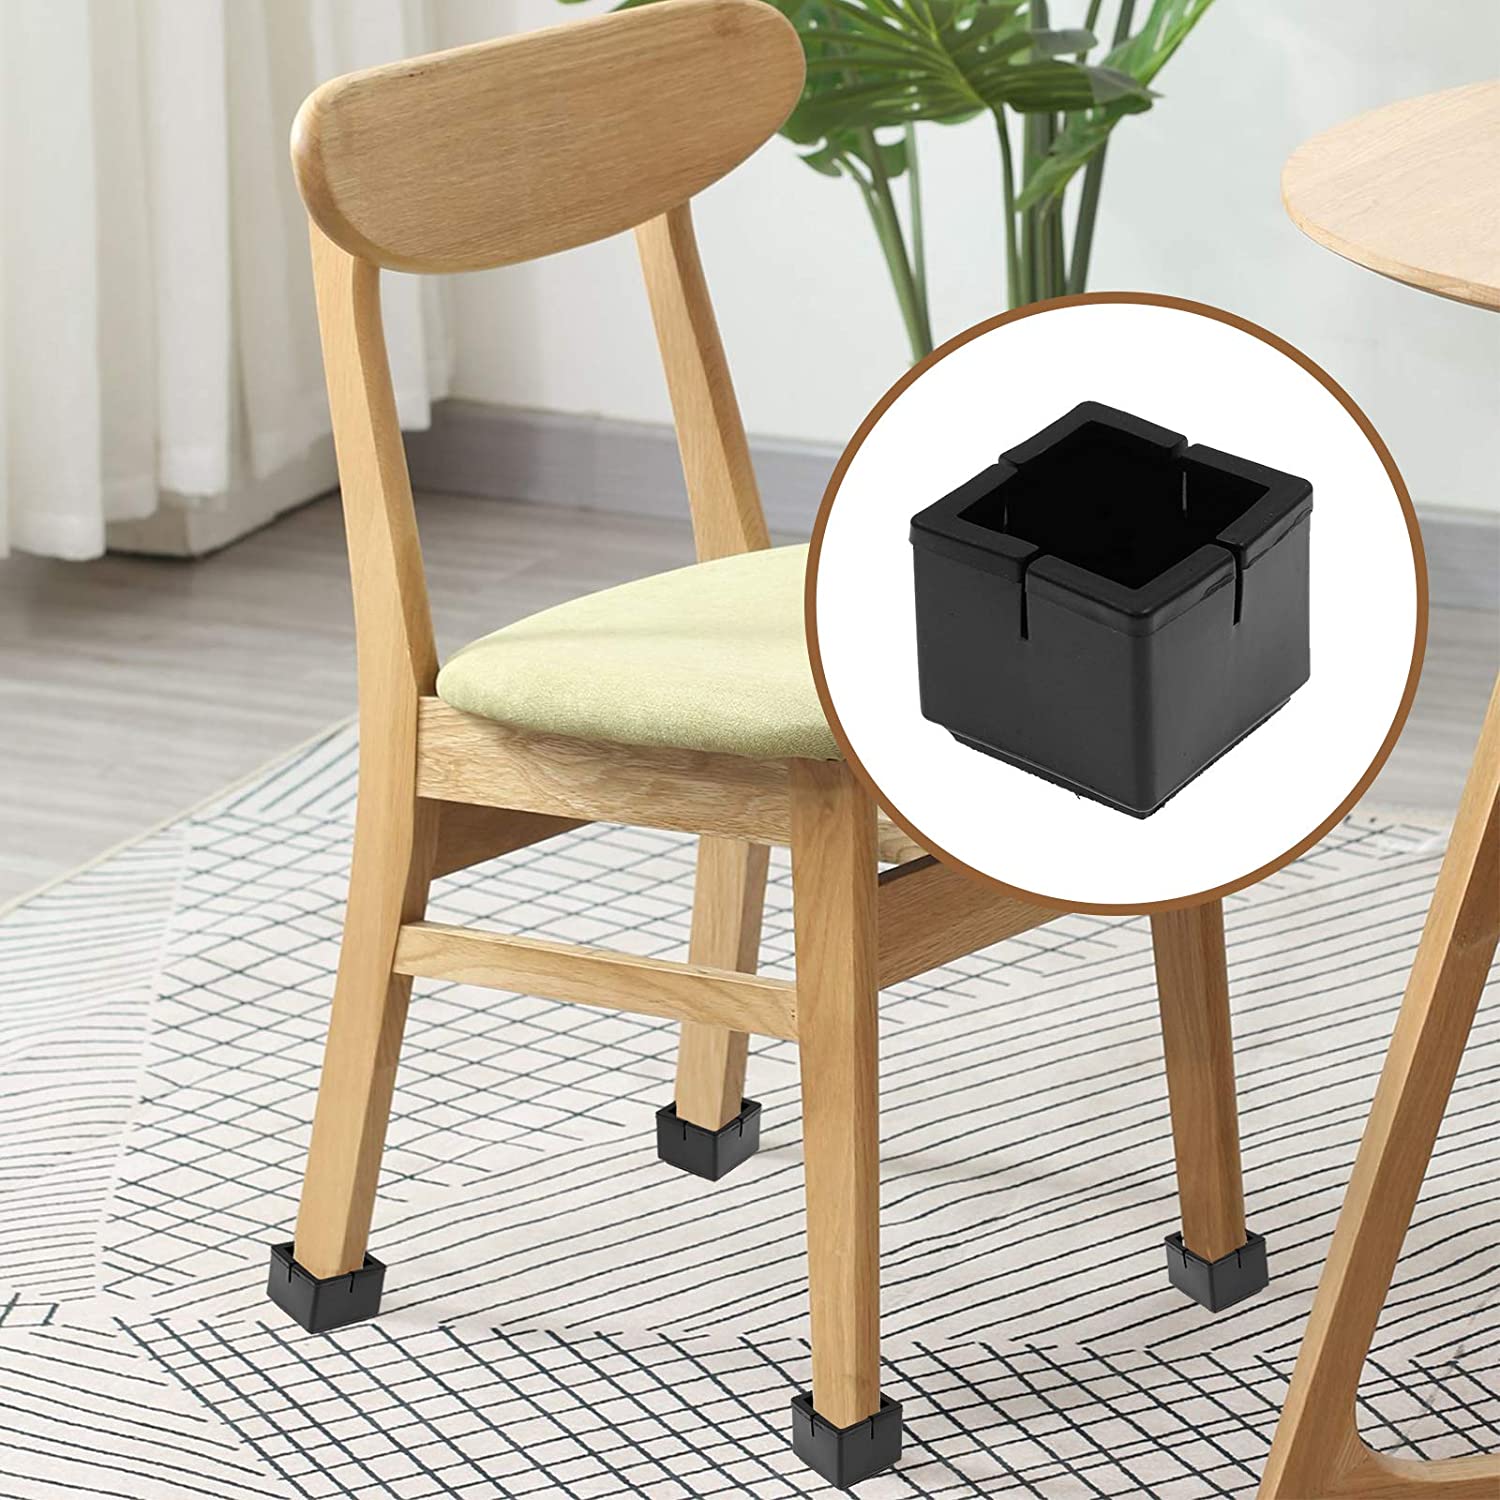 16Pcs Square Chair Leg Caps with Felt Furniture Pads Black Chair Foot Covers Protectors for Hardwood Tile - e4cents